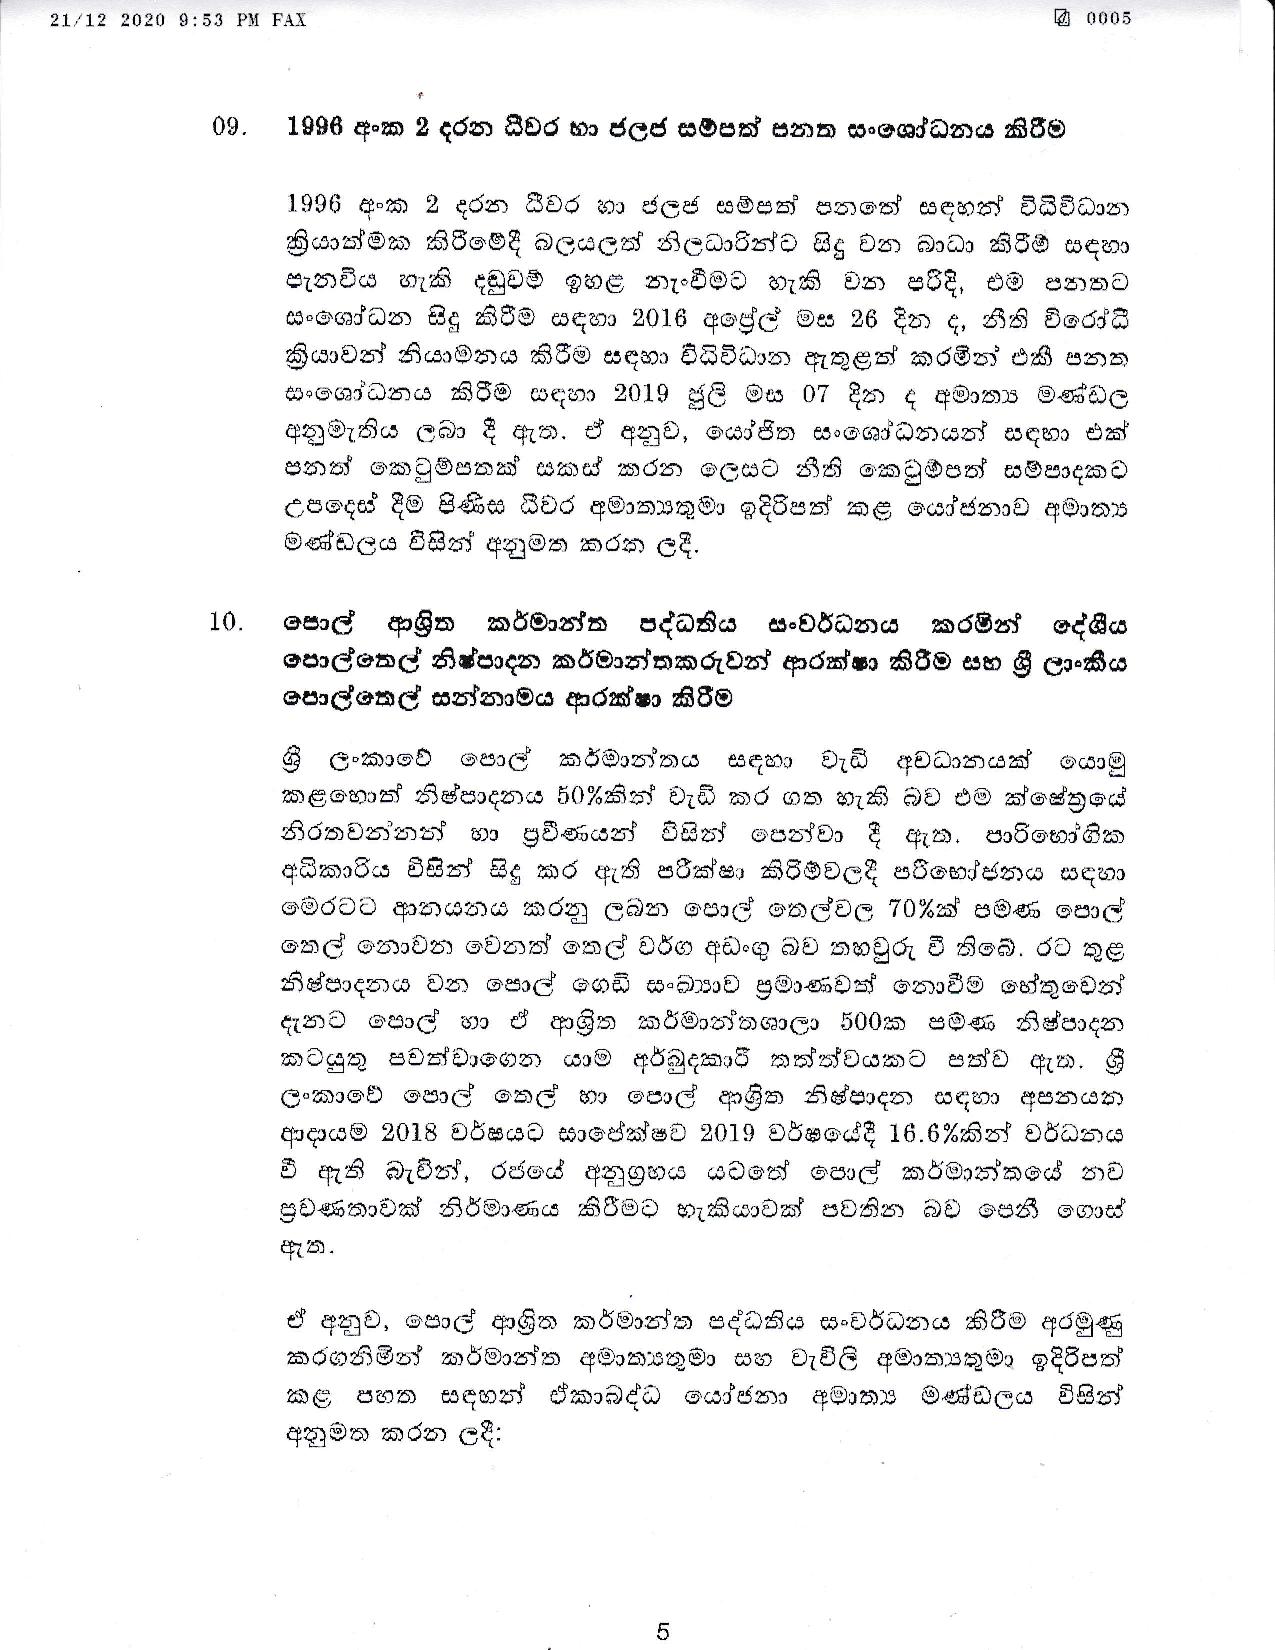 Cabinet Decision on 21.12.2020 page 005